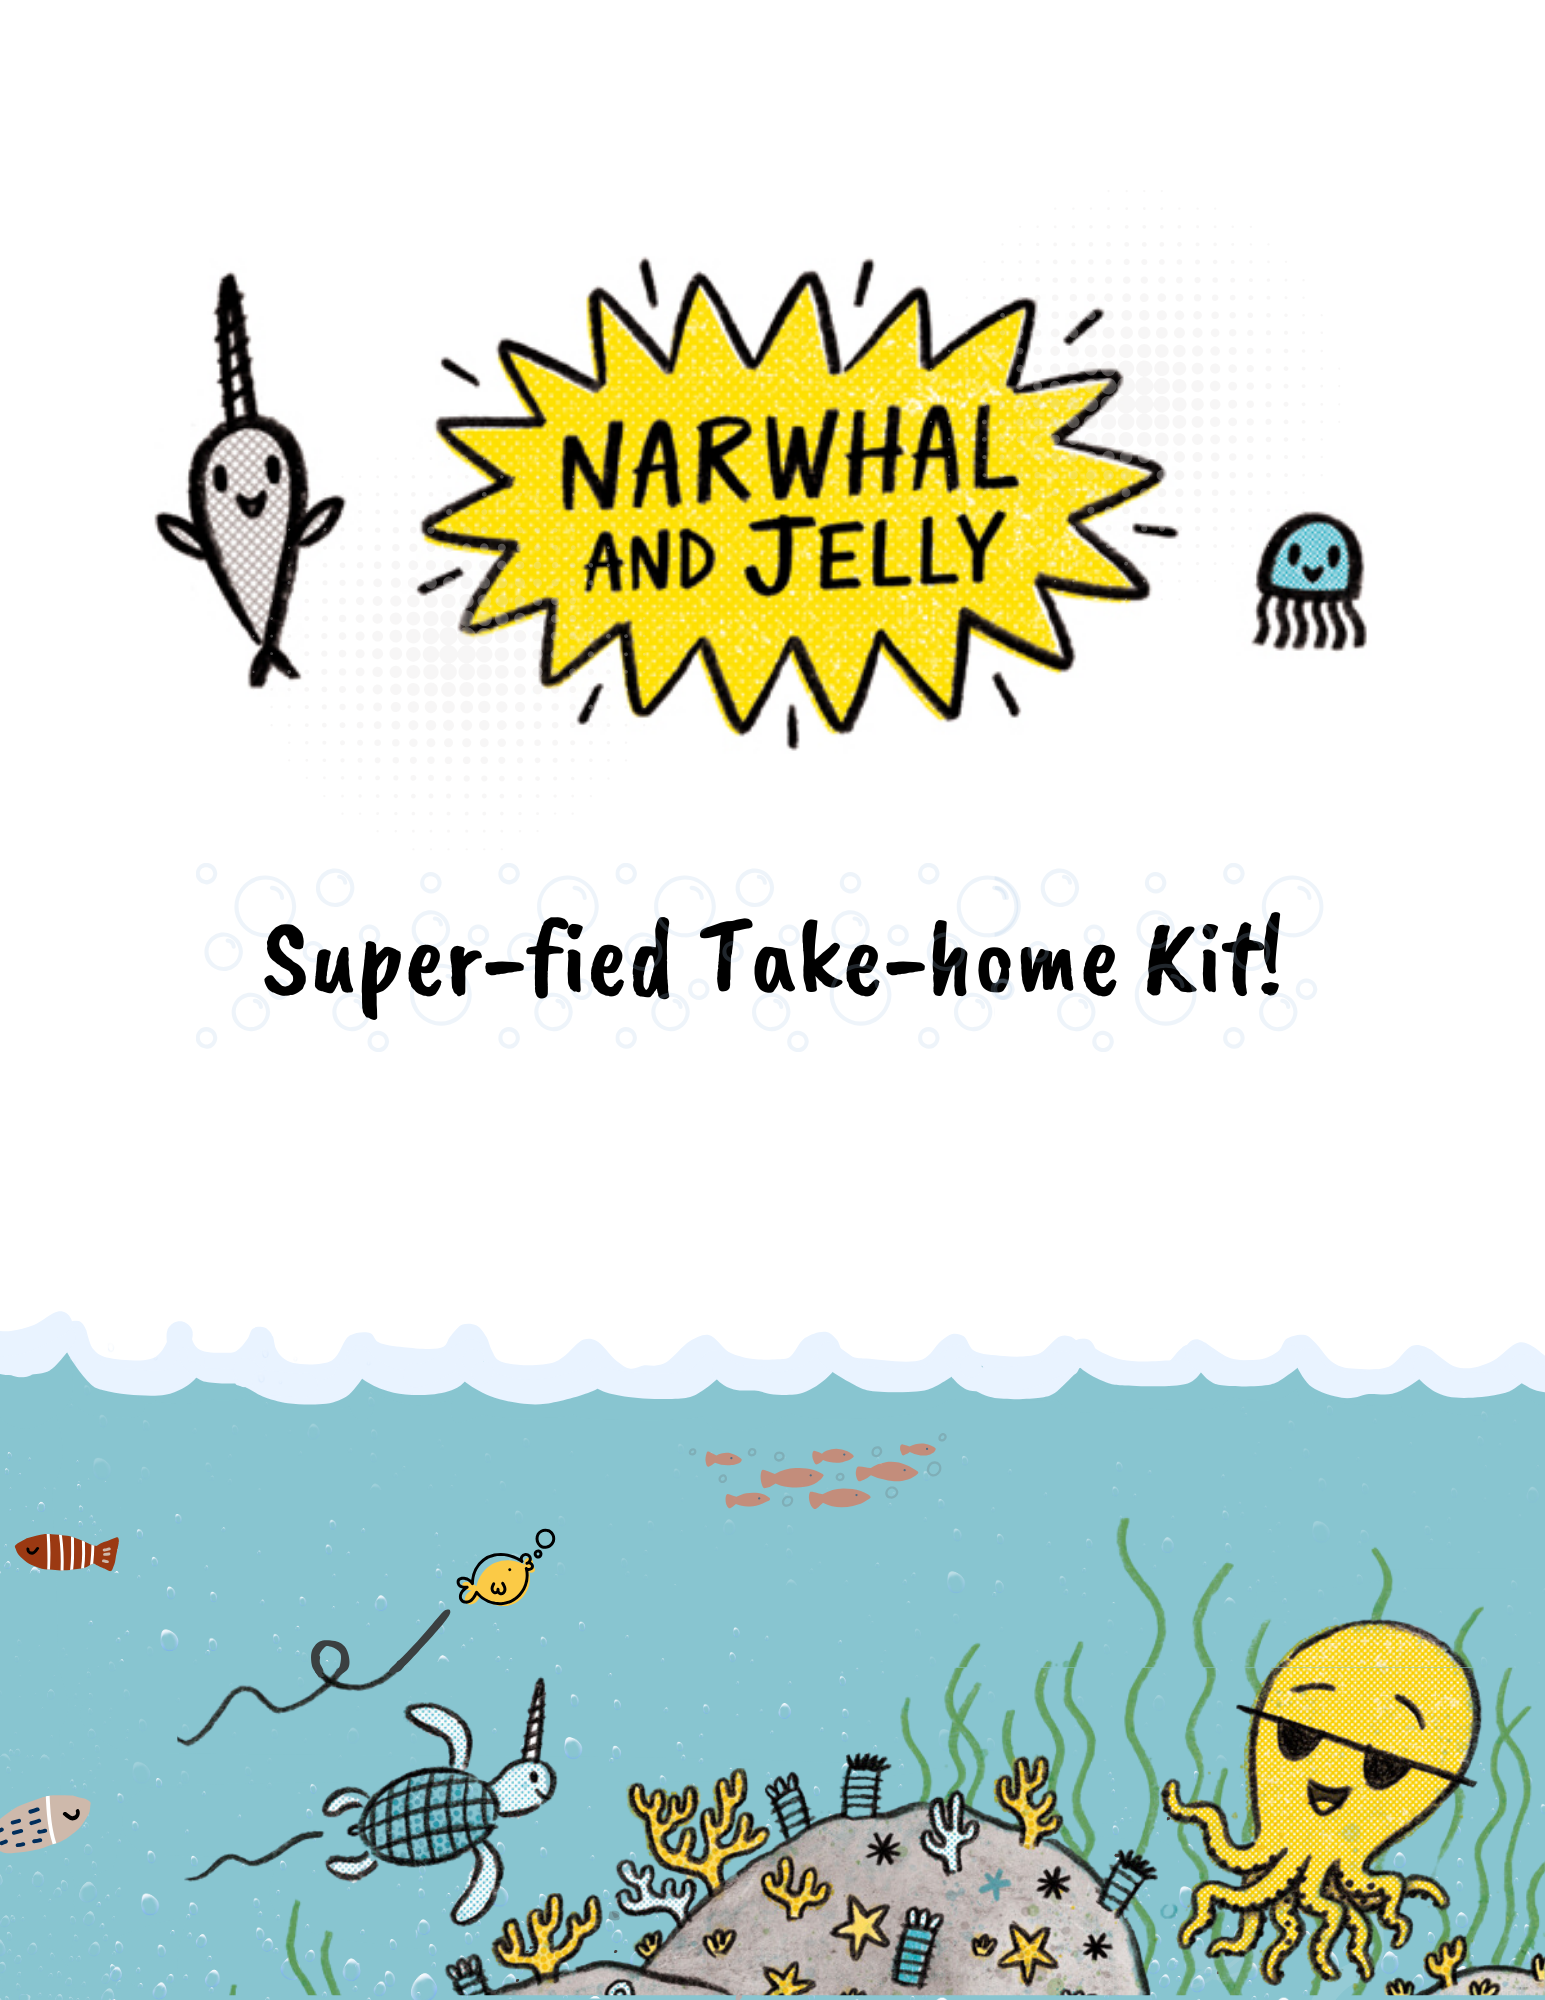 Narwhal and Jelly take-home kit flyer